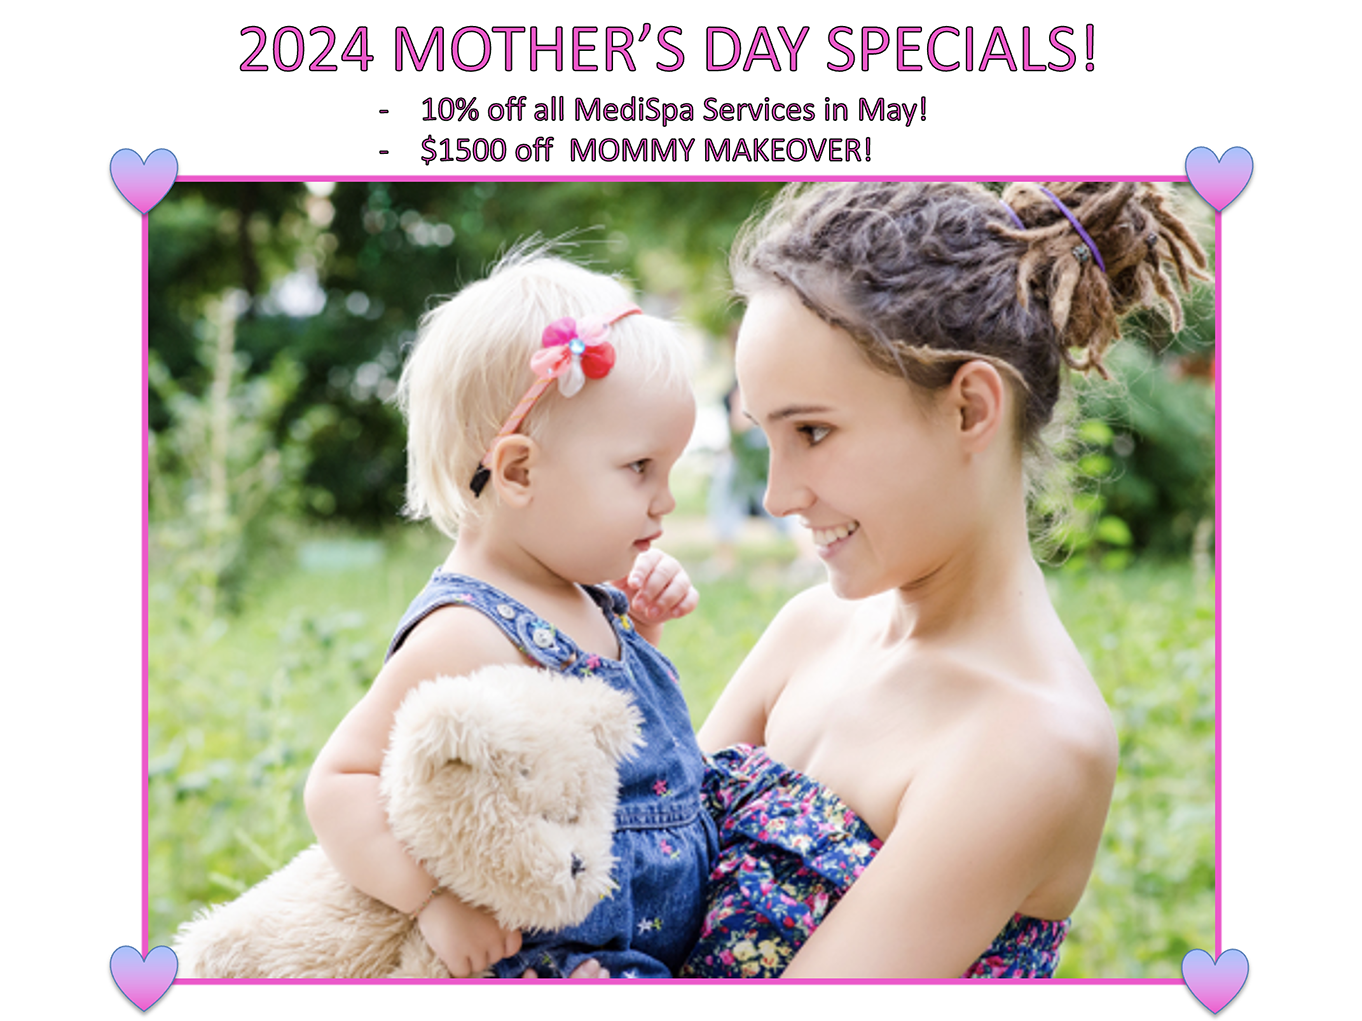 Pacific Plastic Surgery Institute - Mothers Day Specials